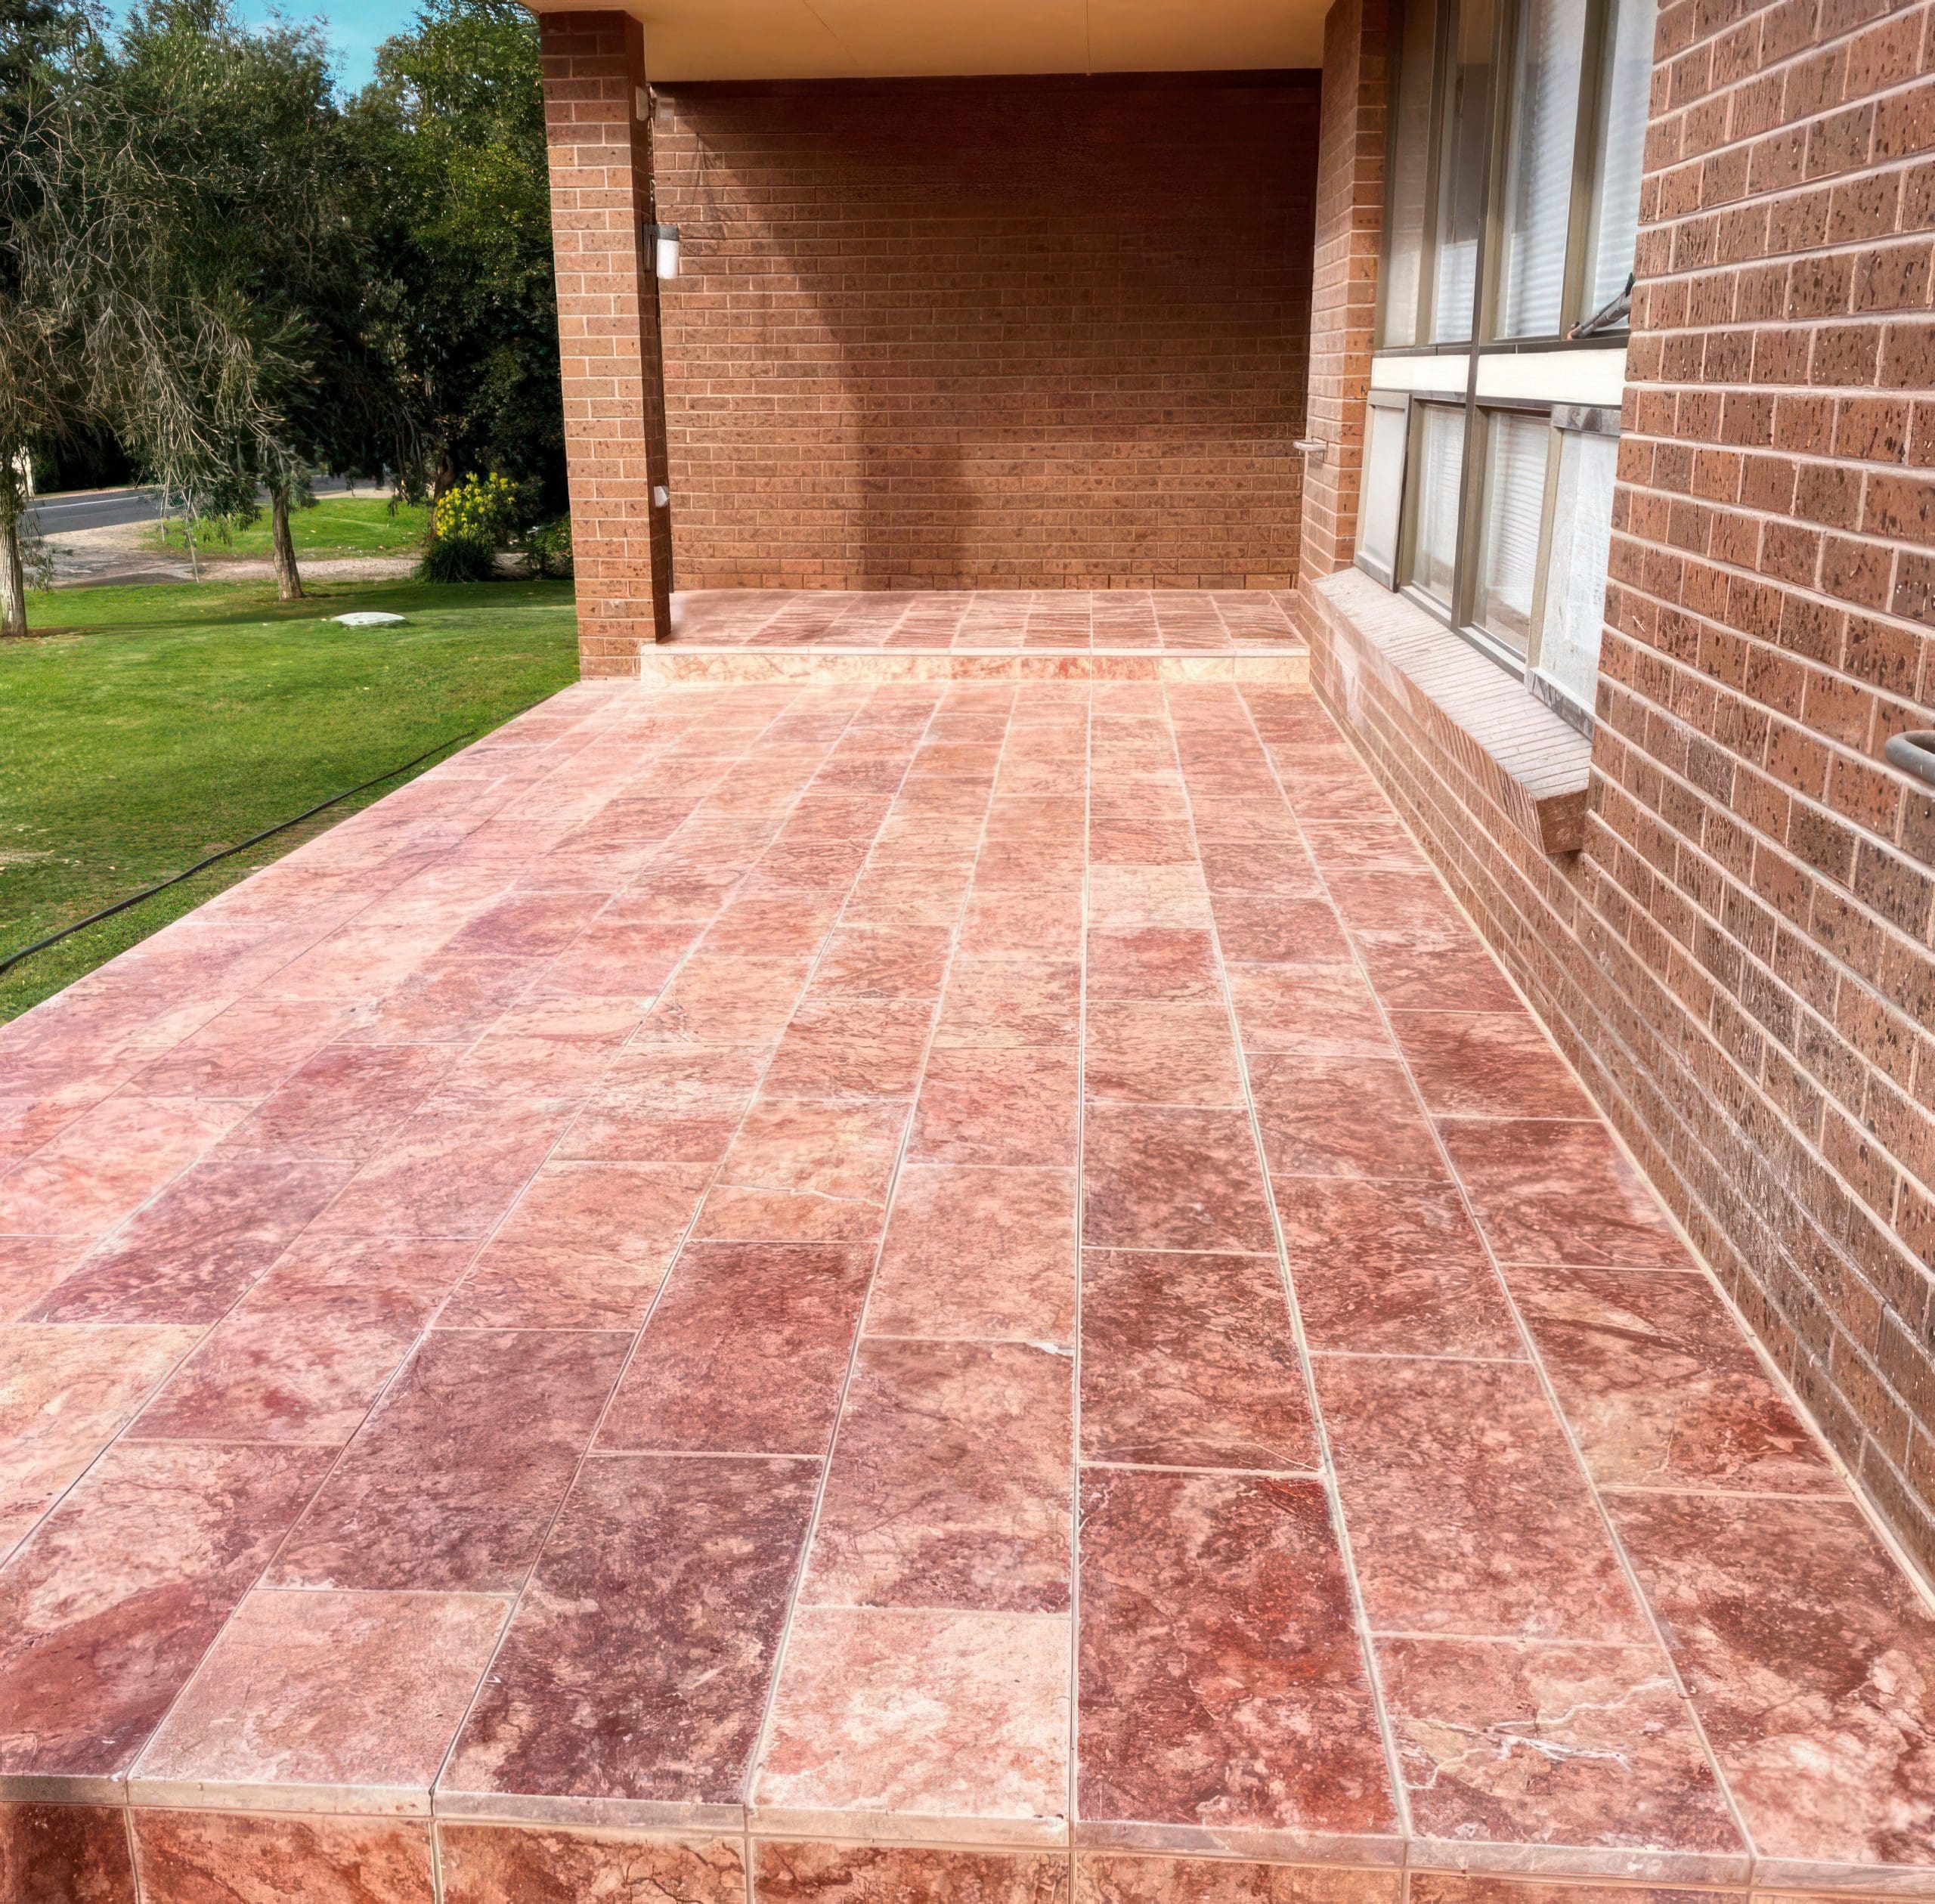 ROSE PINK TRAVERTINE_RMS TRADERS_NATURAL STONE PAVERS POOL COPING SUPPLIER MELBOURNE (7)